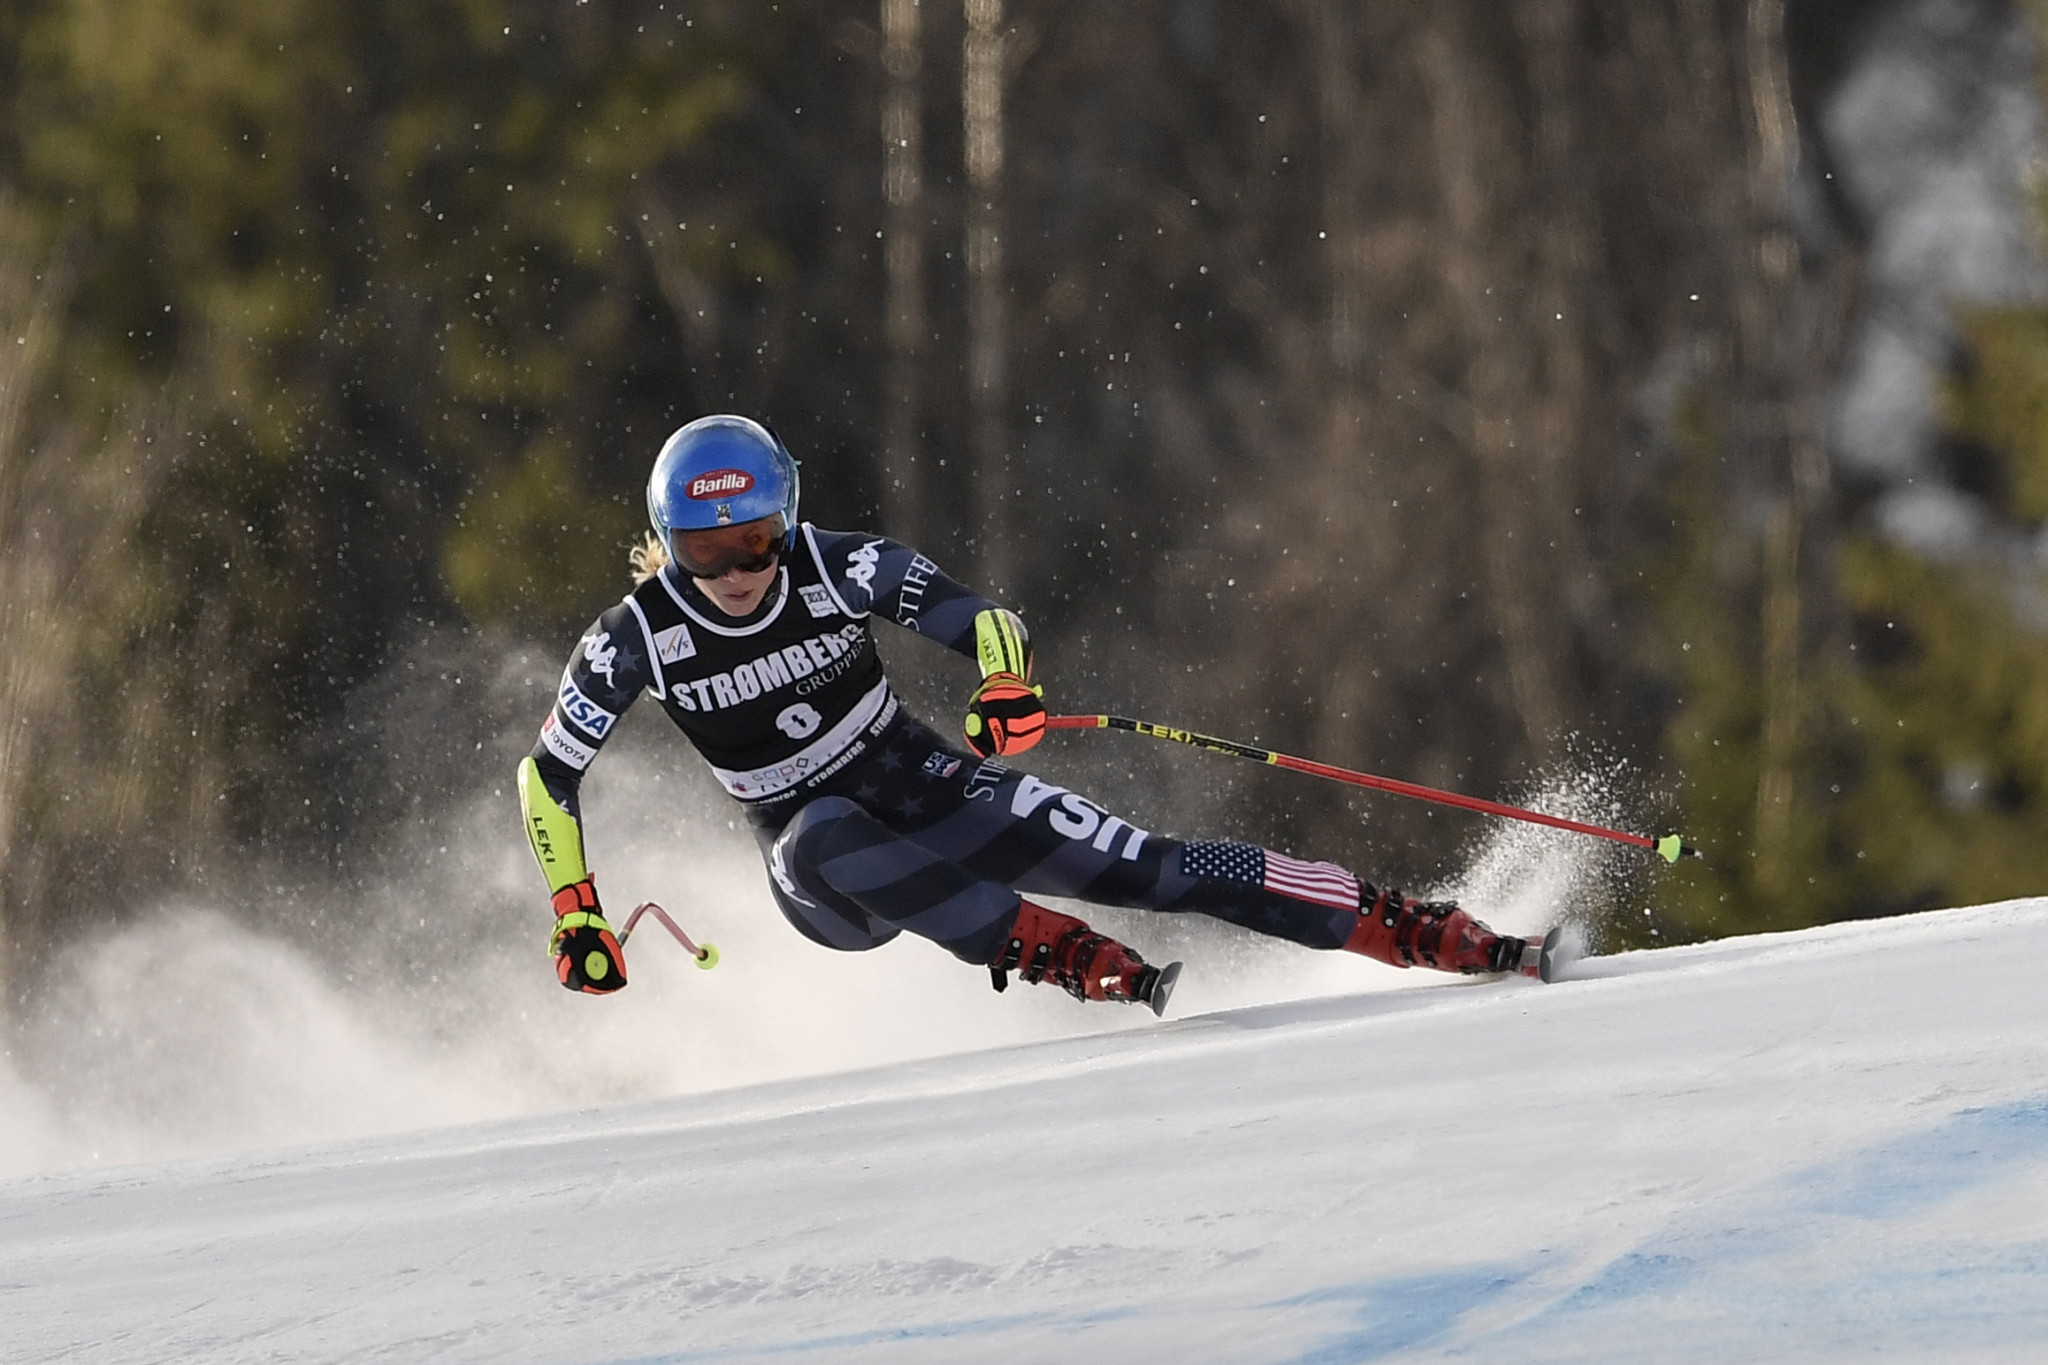 Mikaela Shiffrin will have to wait to tie the record for most World Cup victories ©Getty Images